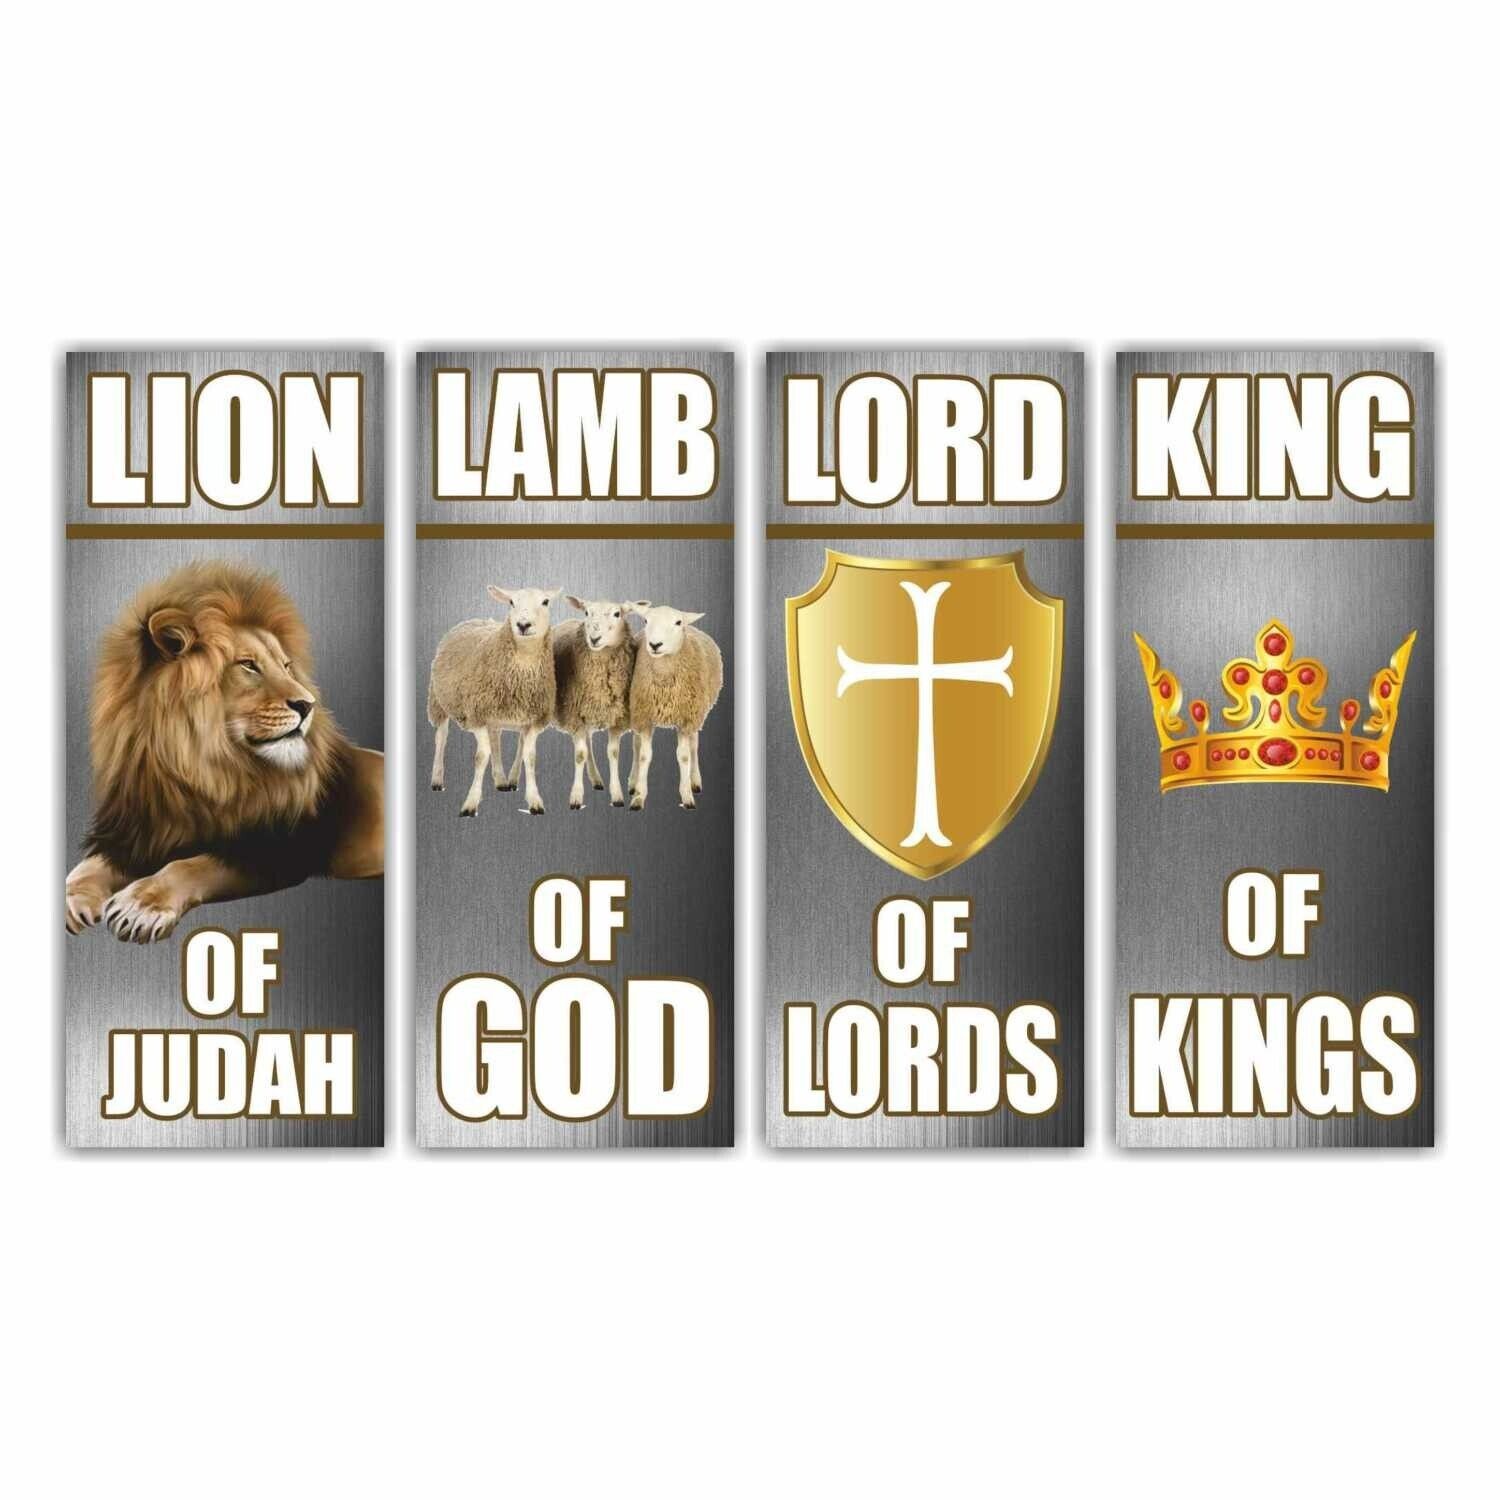 Christian Church Banner Vinyl Poster Sign Lion Lamb King Lord - Set of 4 Banners